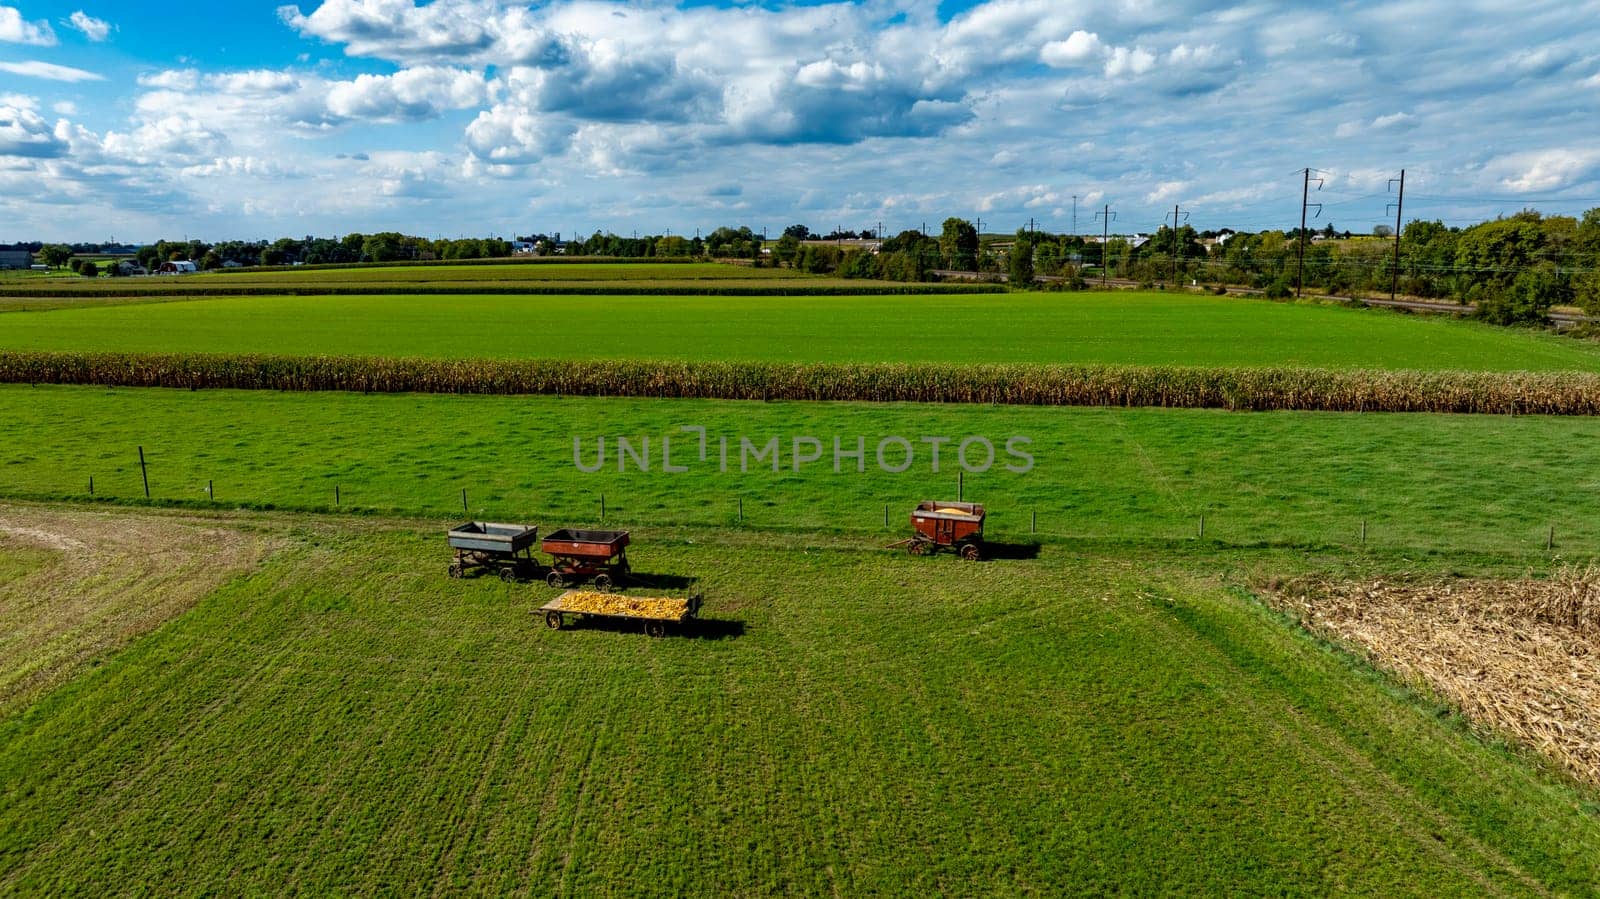 An Agricultural Field with Harvesting Equipment and Cornfield